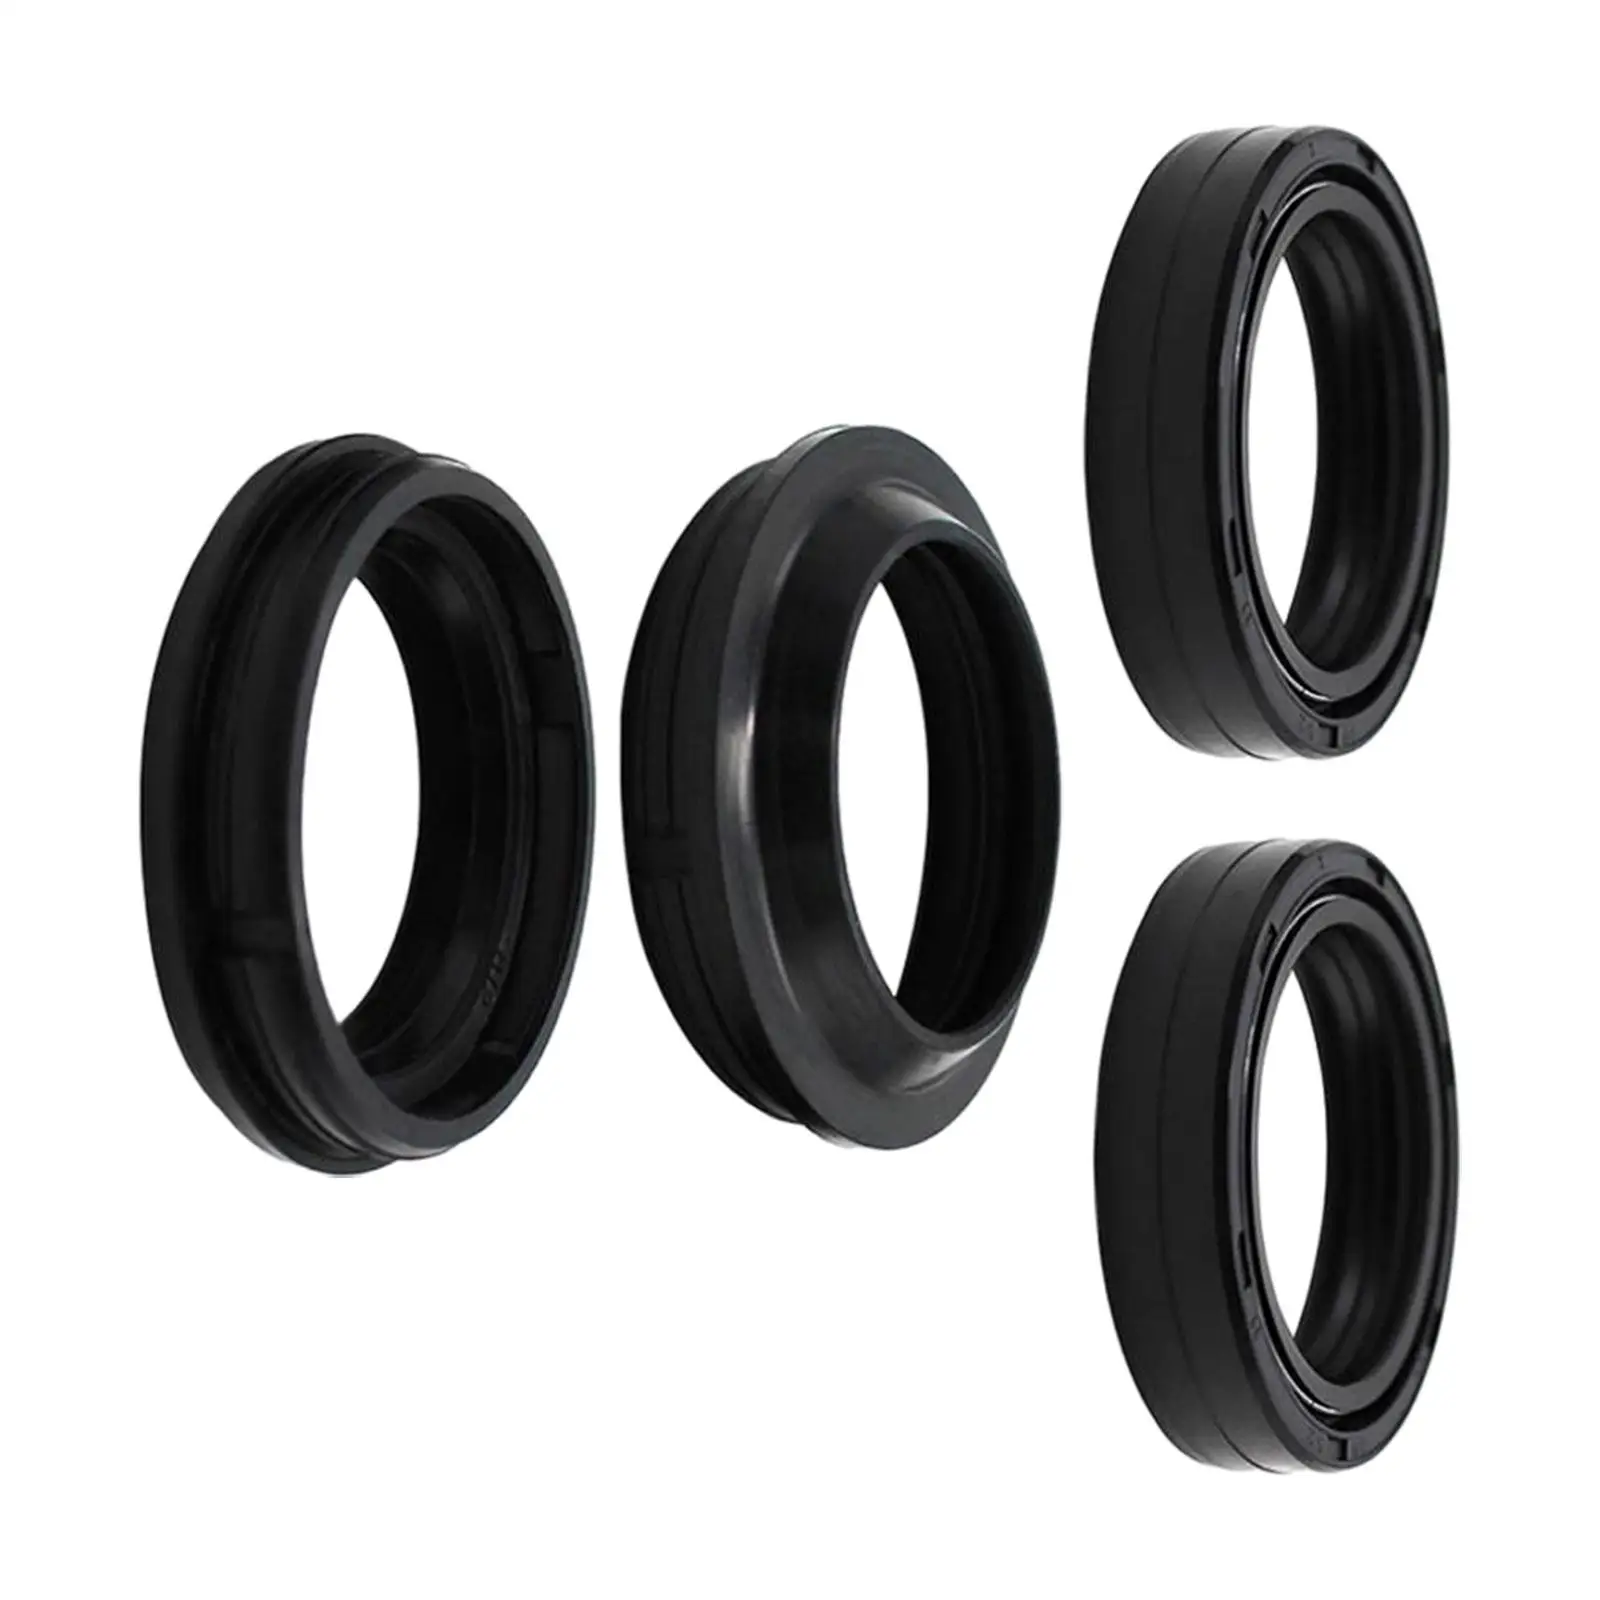 4x Motorcycle Front Fork Damper Oil Seal and Dust Seal Rubber 36x48x11mm for Yamaha XT 125 R Bra 2007 XT 125 x Bra 2007